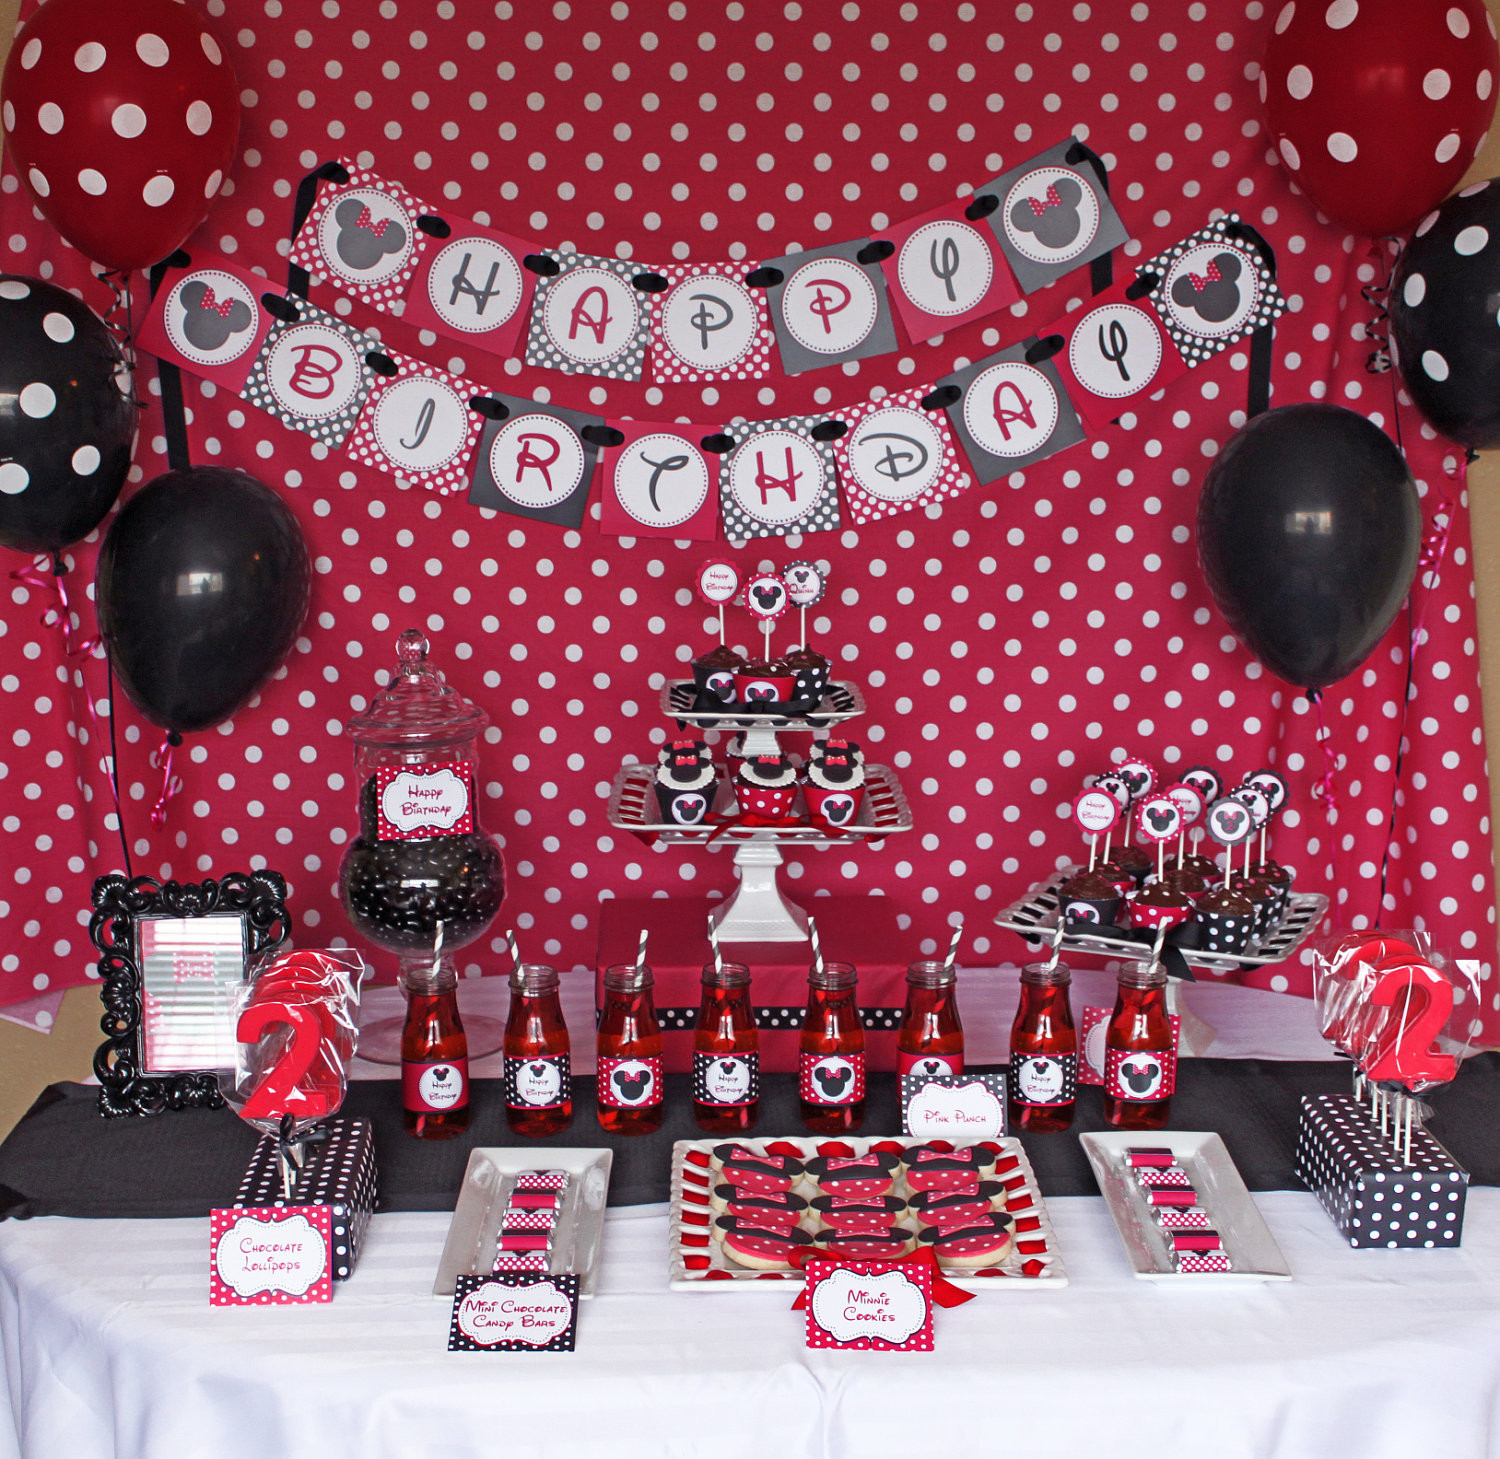 Red Minnie Mouse Birthday Decorations
 Minnie Mouse birthday party package Red Deluxe PRINTABLE